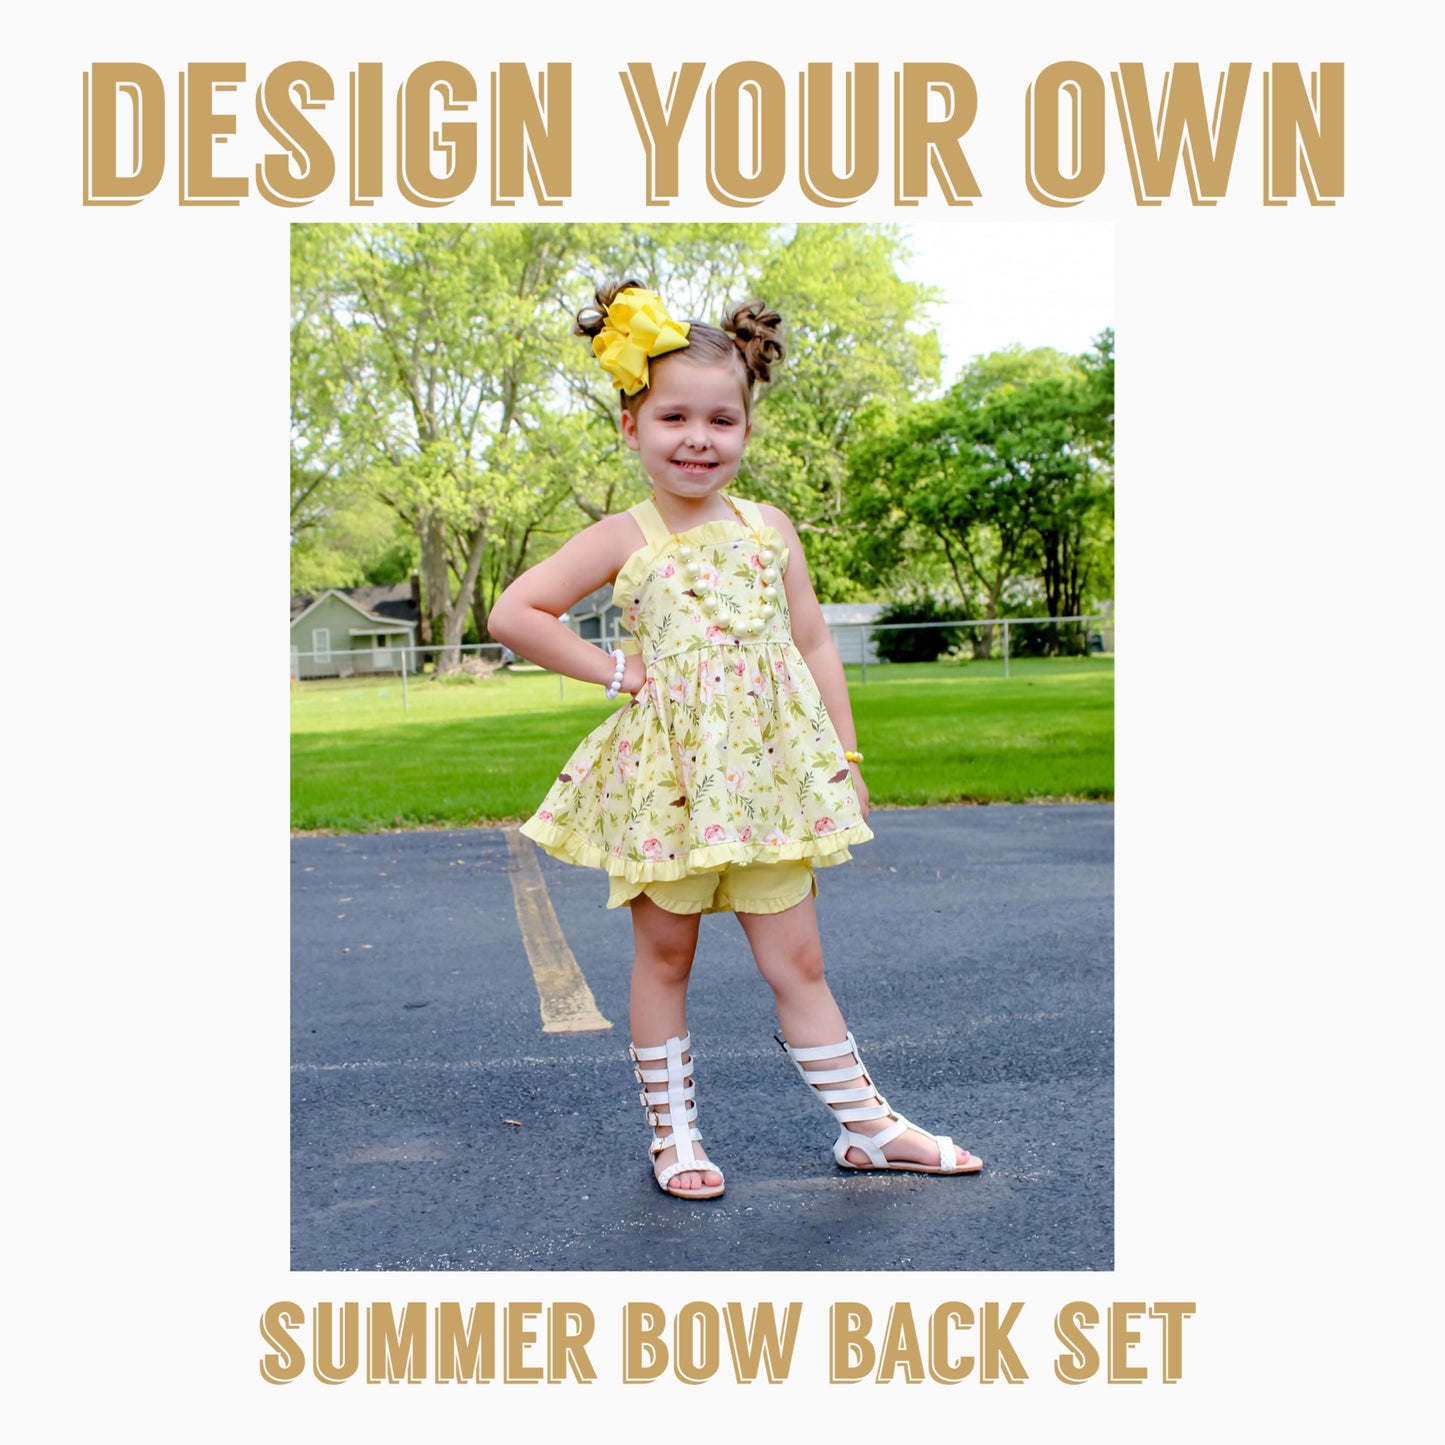 DESIGN YOUR OWN | WOVEN SUMMER BOW BACK TOP OR SET